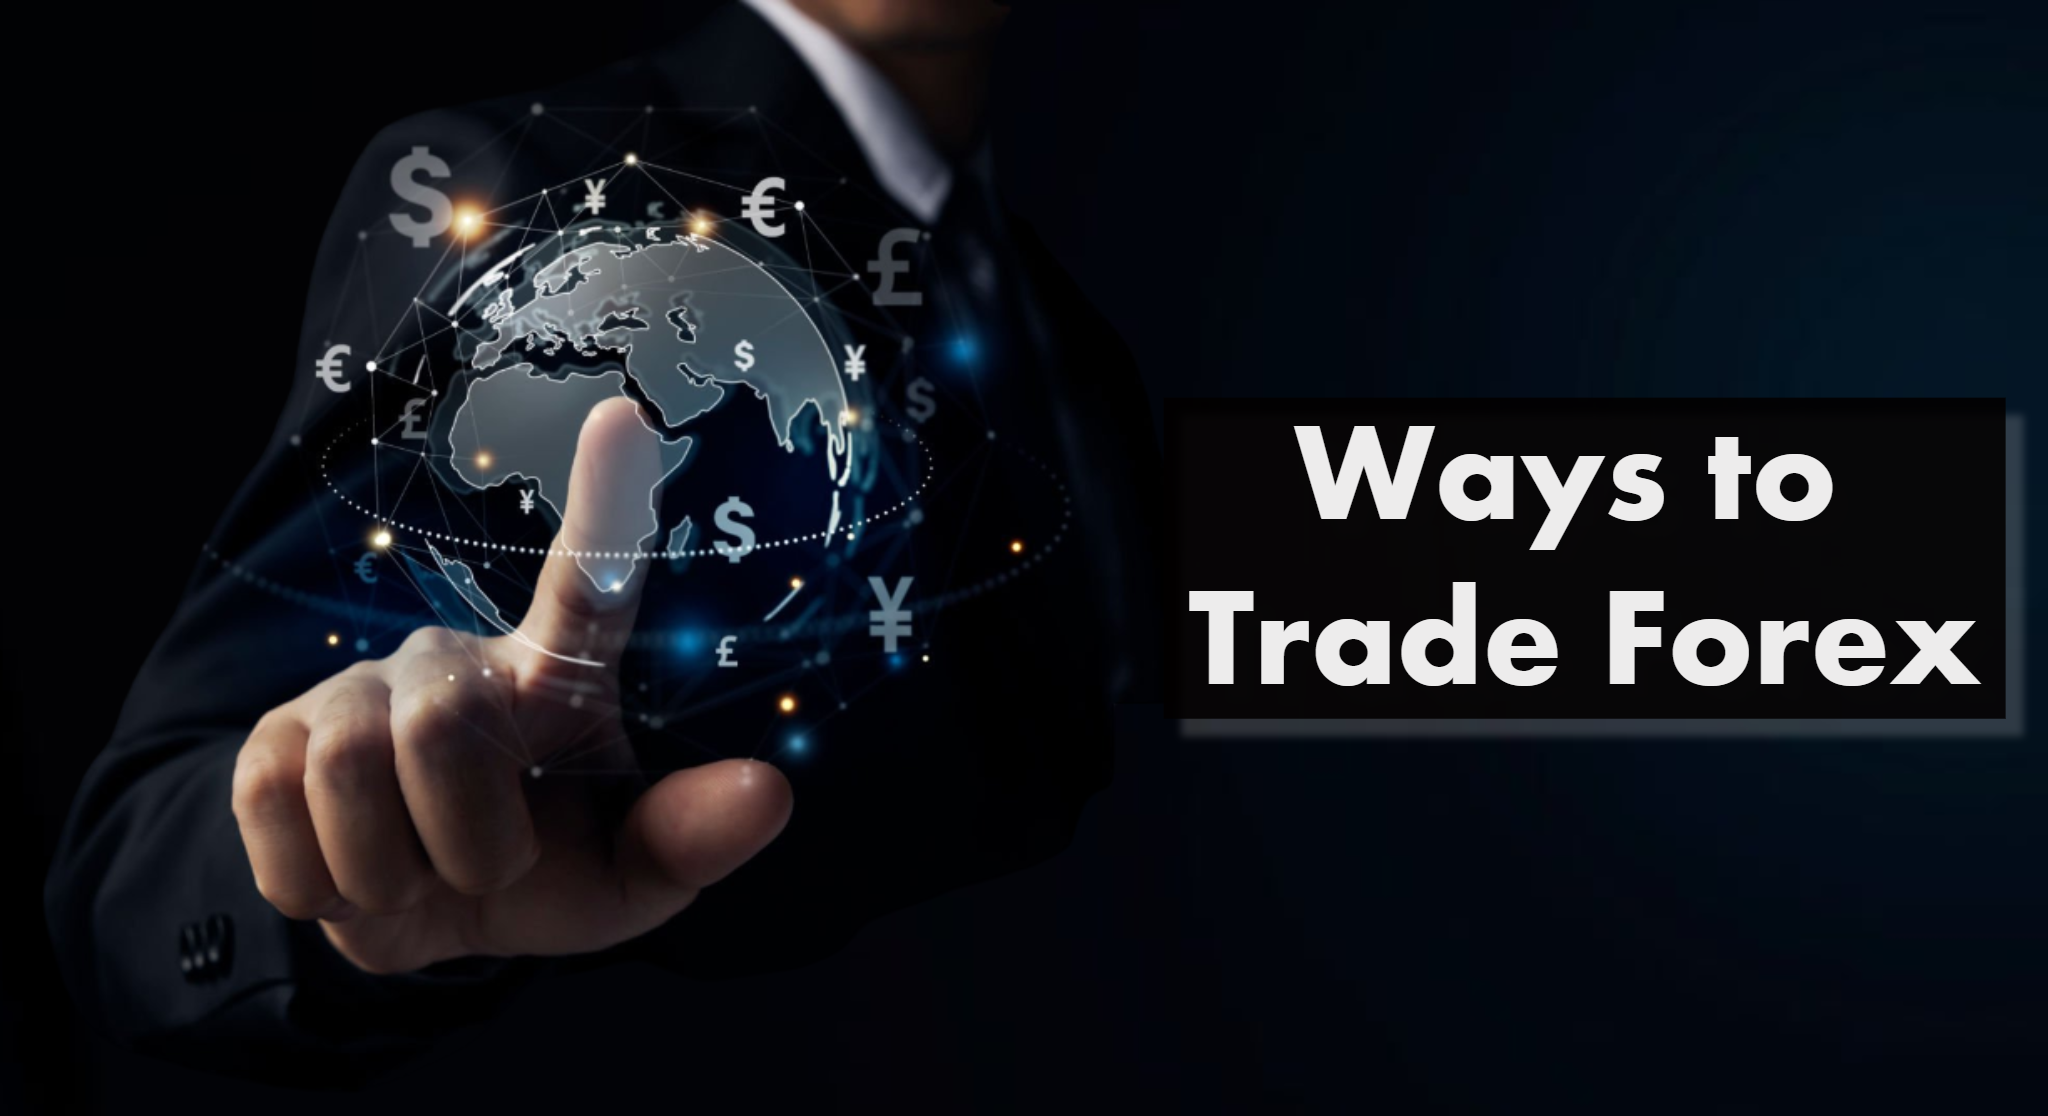 From futures to options, ETFs to CFDs - we analyze every single way to trade forex. Find what fits your goals and experience.